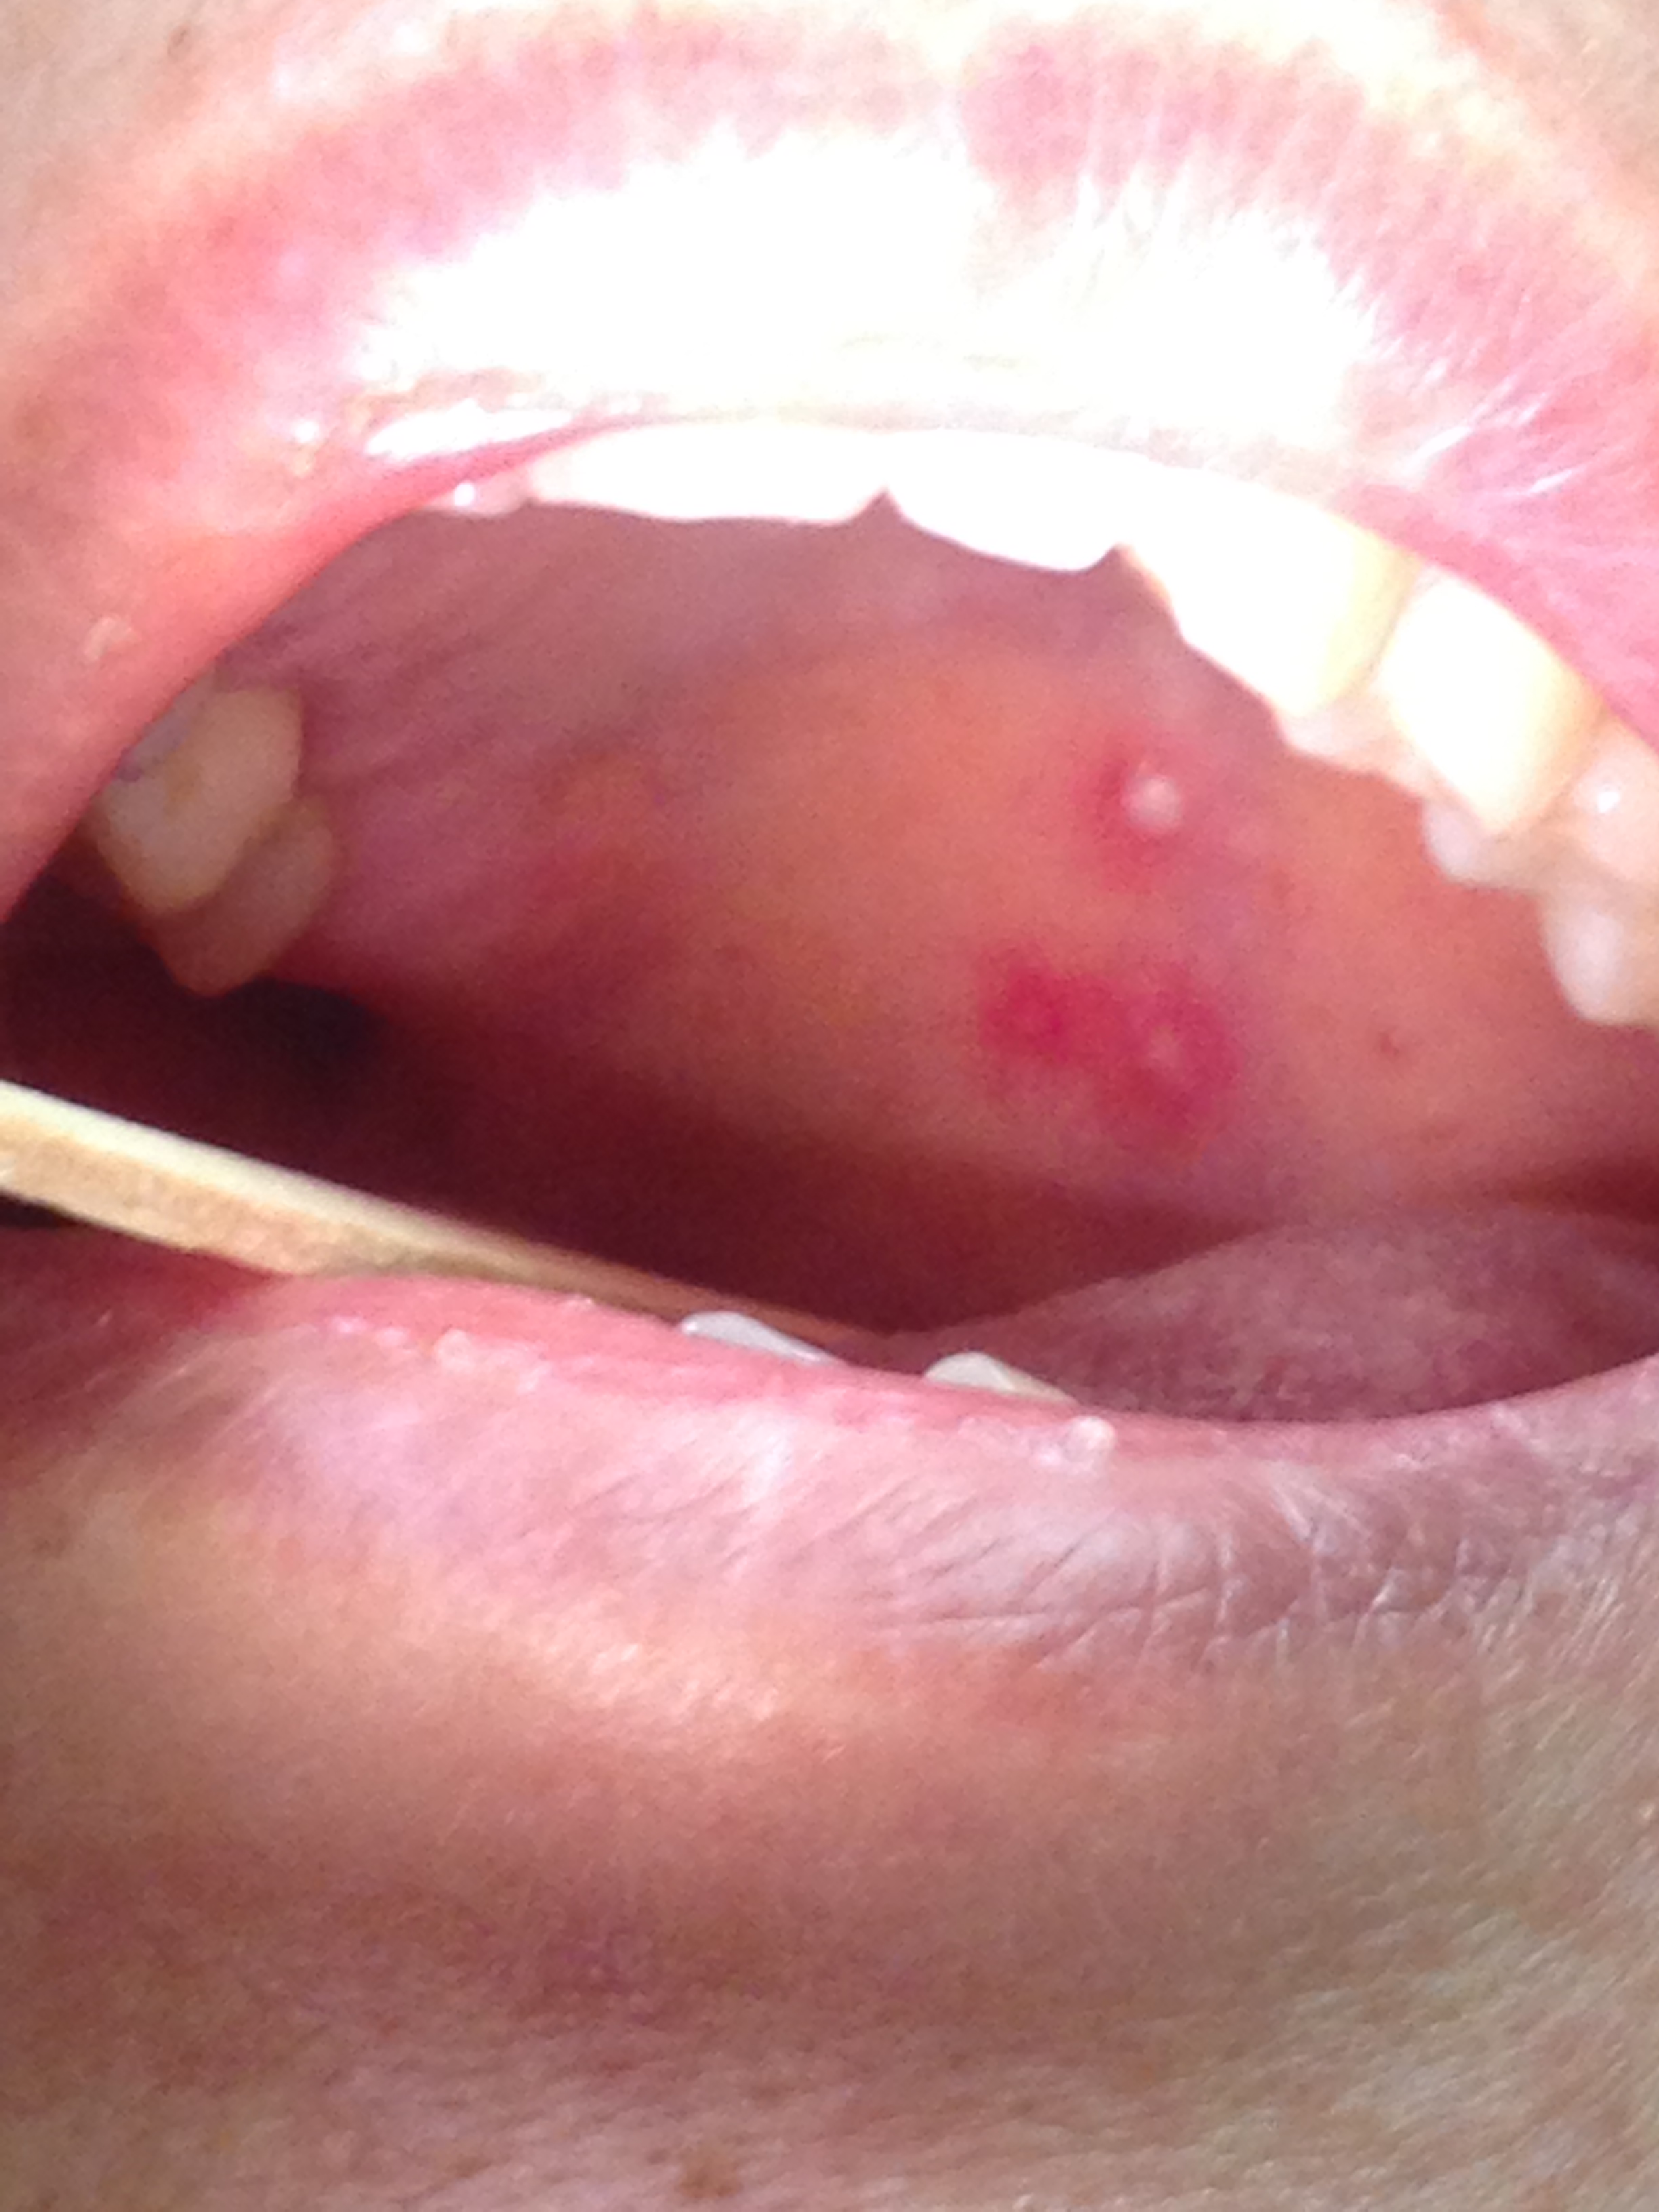 Vesicles on the left soft palate in Ramsay Hunt syndrome